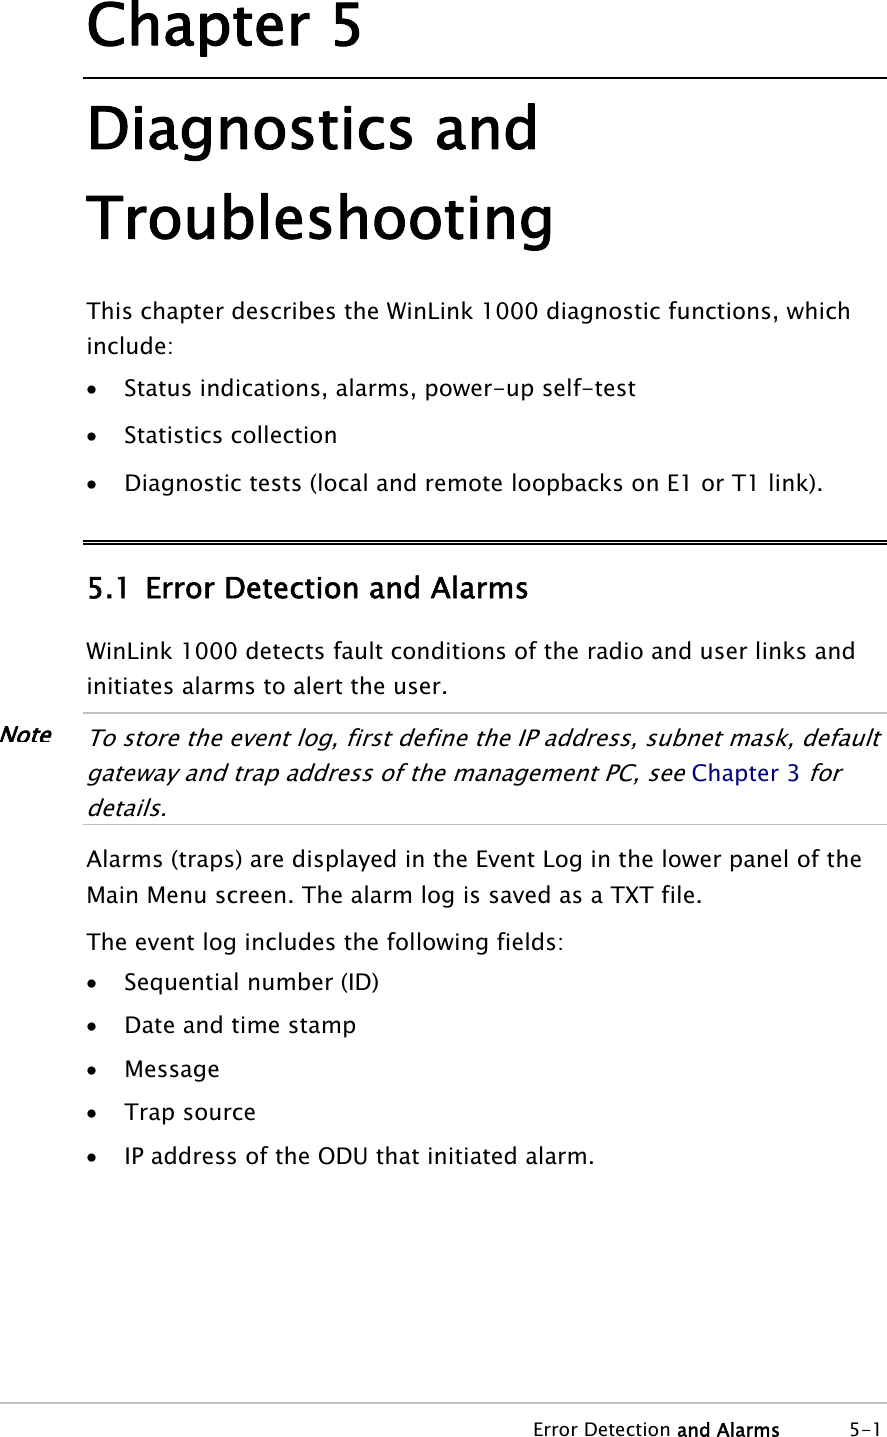 Chapter 5 Diagnostics and Troubleshooting This chapter describes the WinLink 1000 diagnostic functions, which include: • Status indications, alarms, power-up self-test • Statistics collection • Diagnostic tests (local and remote loopbacks on E1 or T1 link). 5.1 Error Detection and Alarms WinLink 1000 detects fault conditions of the radio and user links and initiates alarms to alert the user.  NoteTo store the event log, first define the IP address, subnet mask, default gateway and trap address of the management PC, see Chapter 3 for details.  Alarms (traps) are displayed in the Event Log in the lower panel of the Main Menu screen. The alarm log is saved as a TXT file. The event log includes the following fields: • Sequential number (ID) • Date and time stamp • Message • Trap source • IP address of the ODU that initiated alarm.  Error Detection and Alarms 5-1 